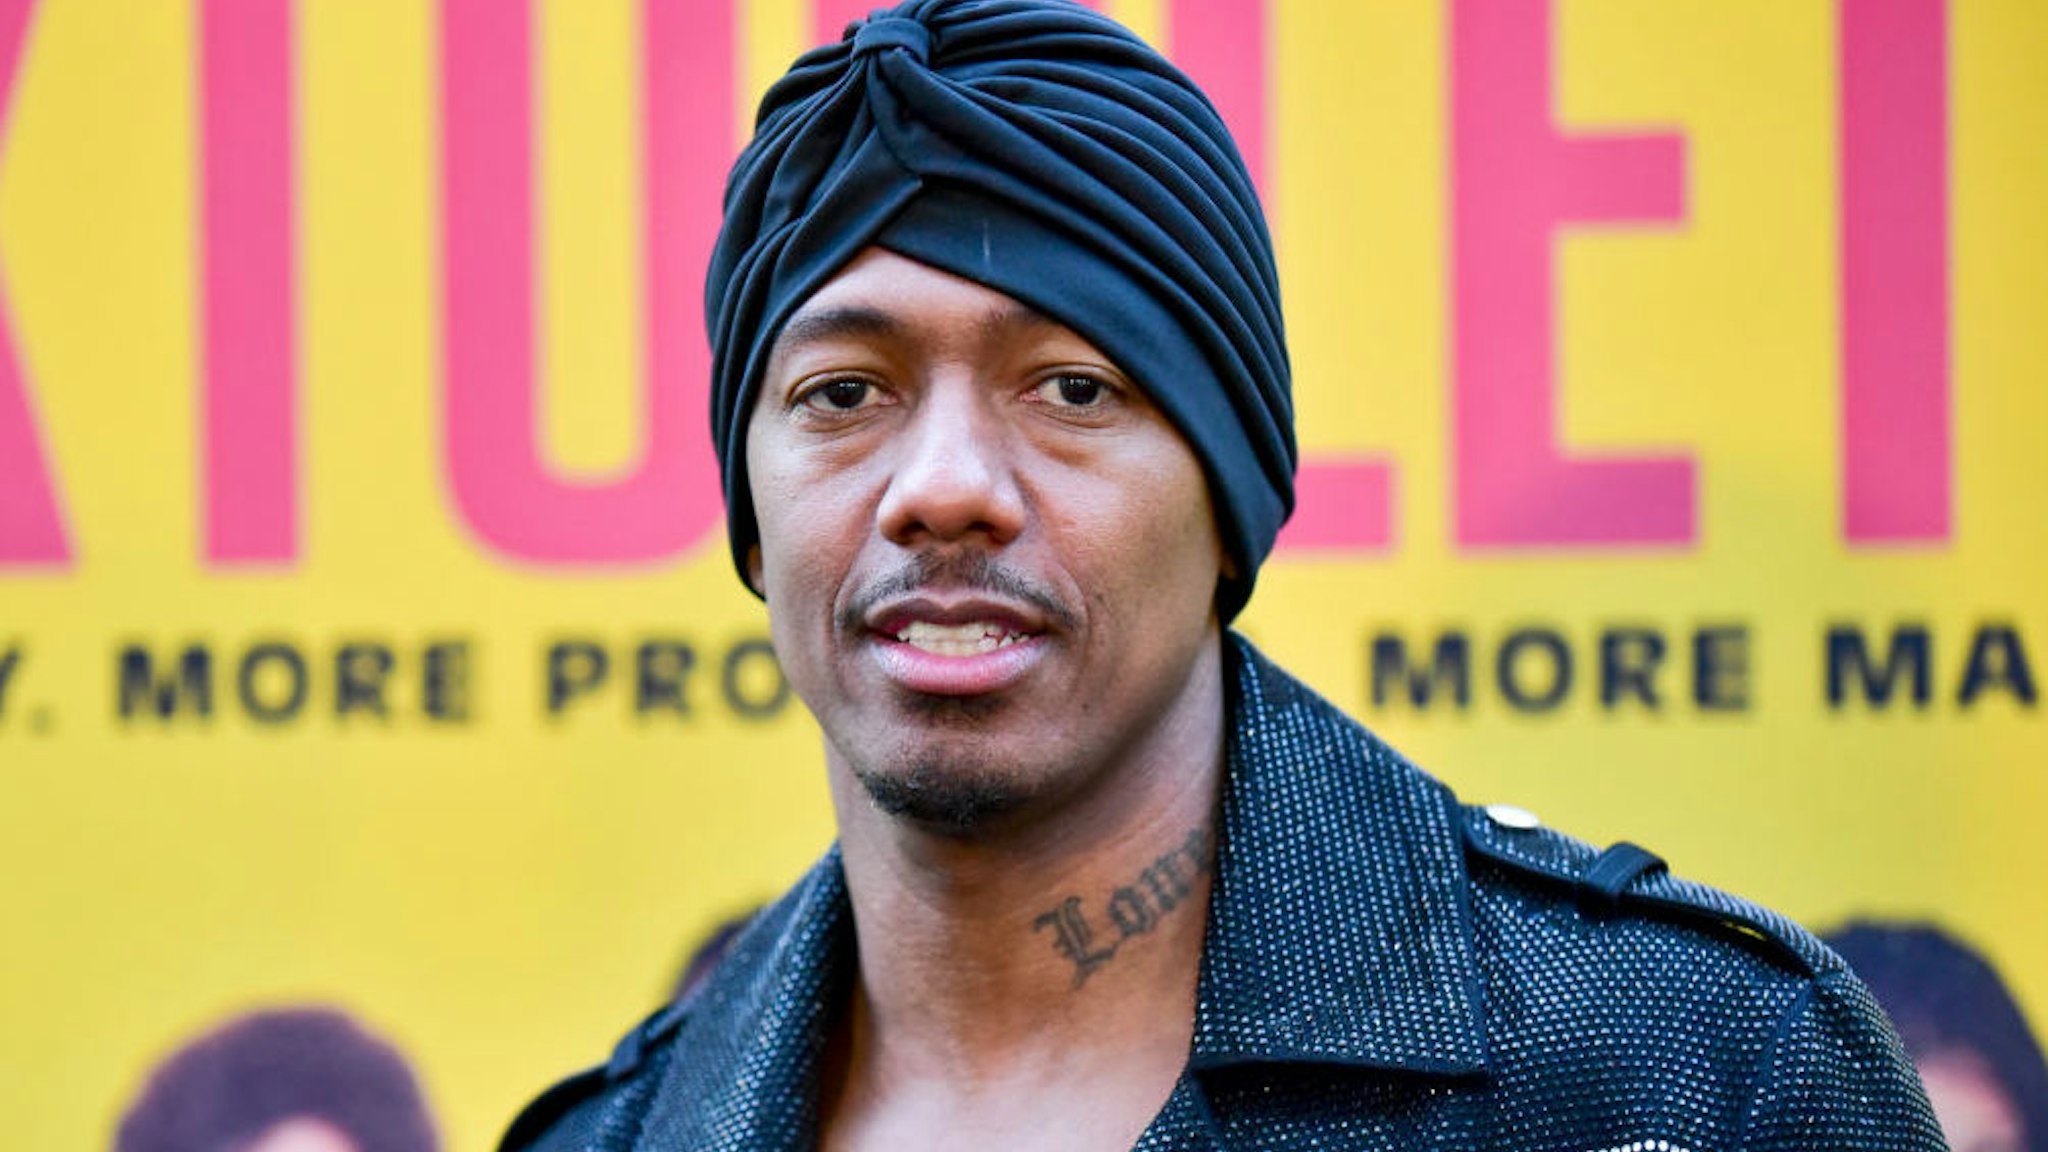 Nick Cannon attends the premiere of Netflix's "Sextuplets" at ArcLight Hollywood on August 07, 2019 in Hollywood, California.